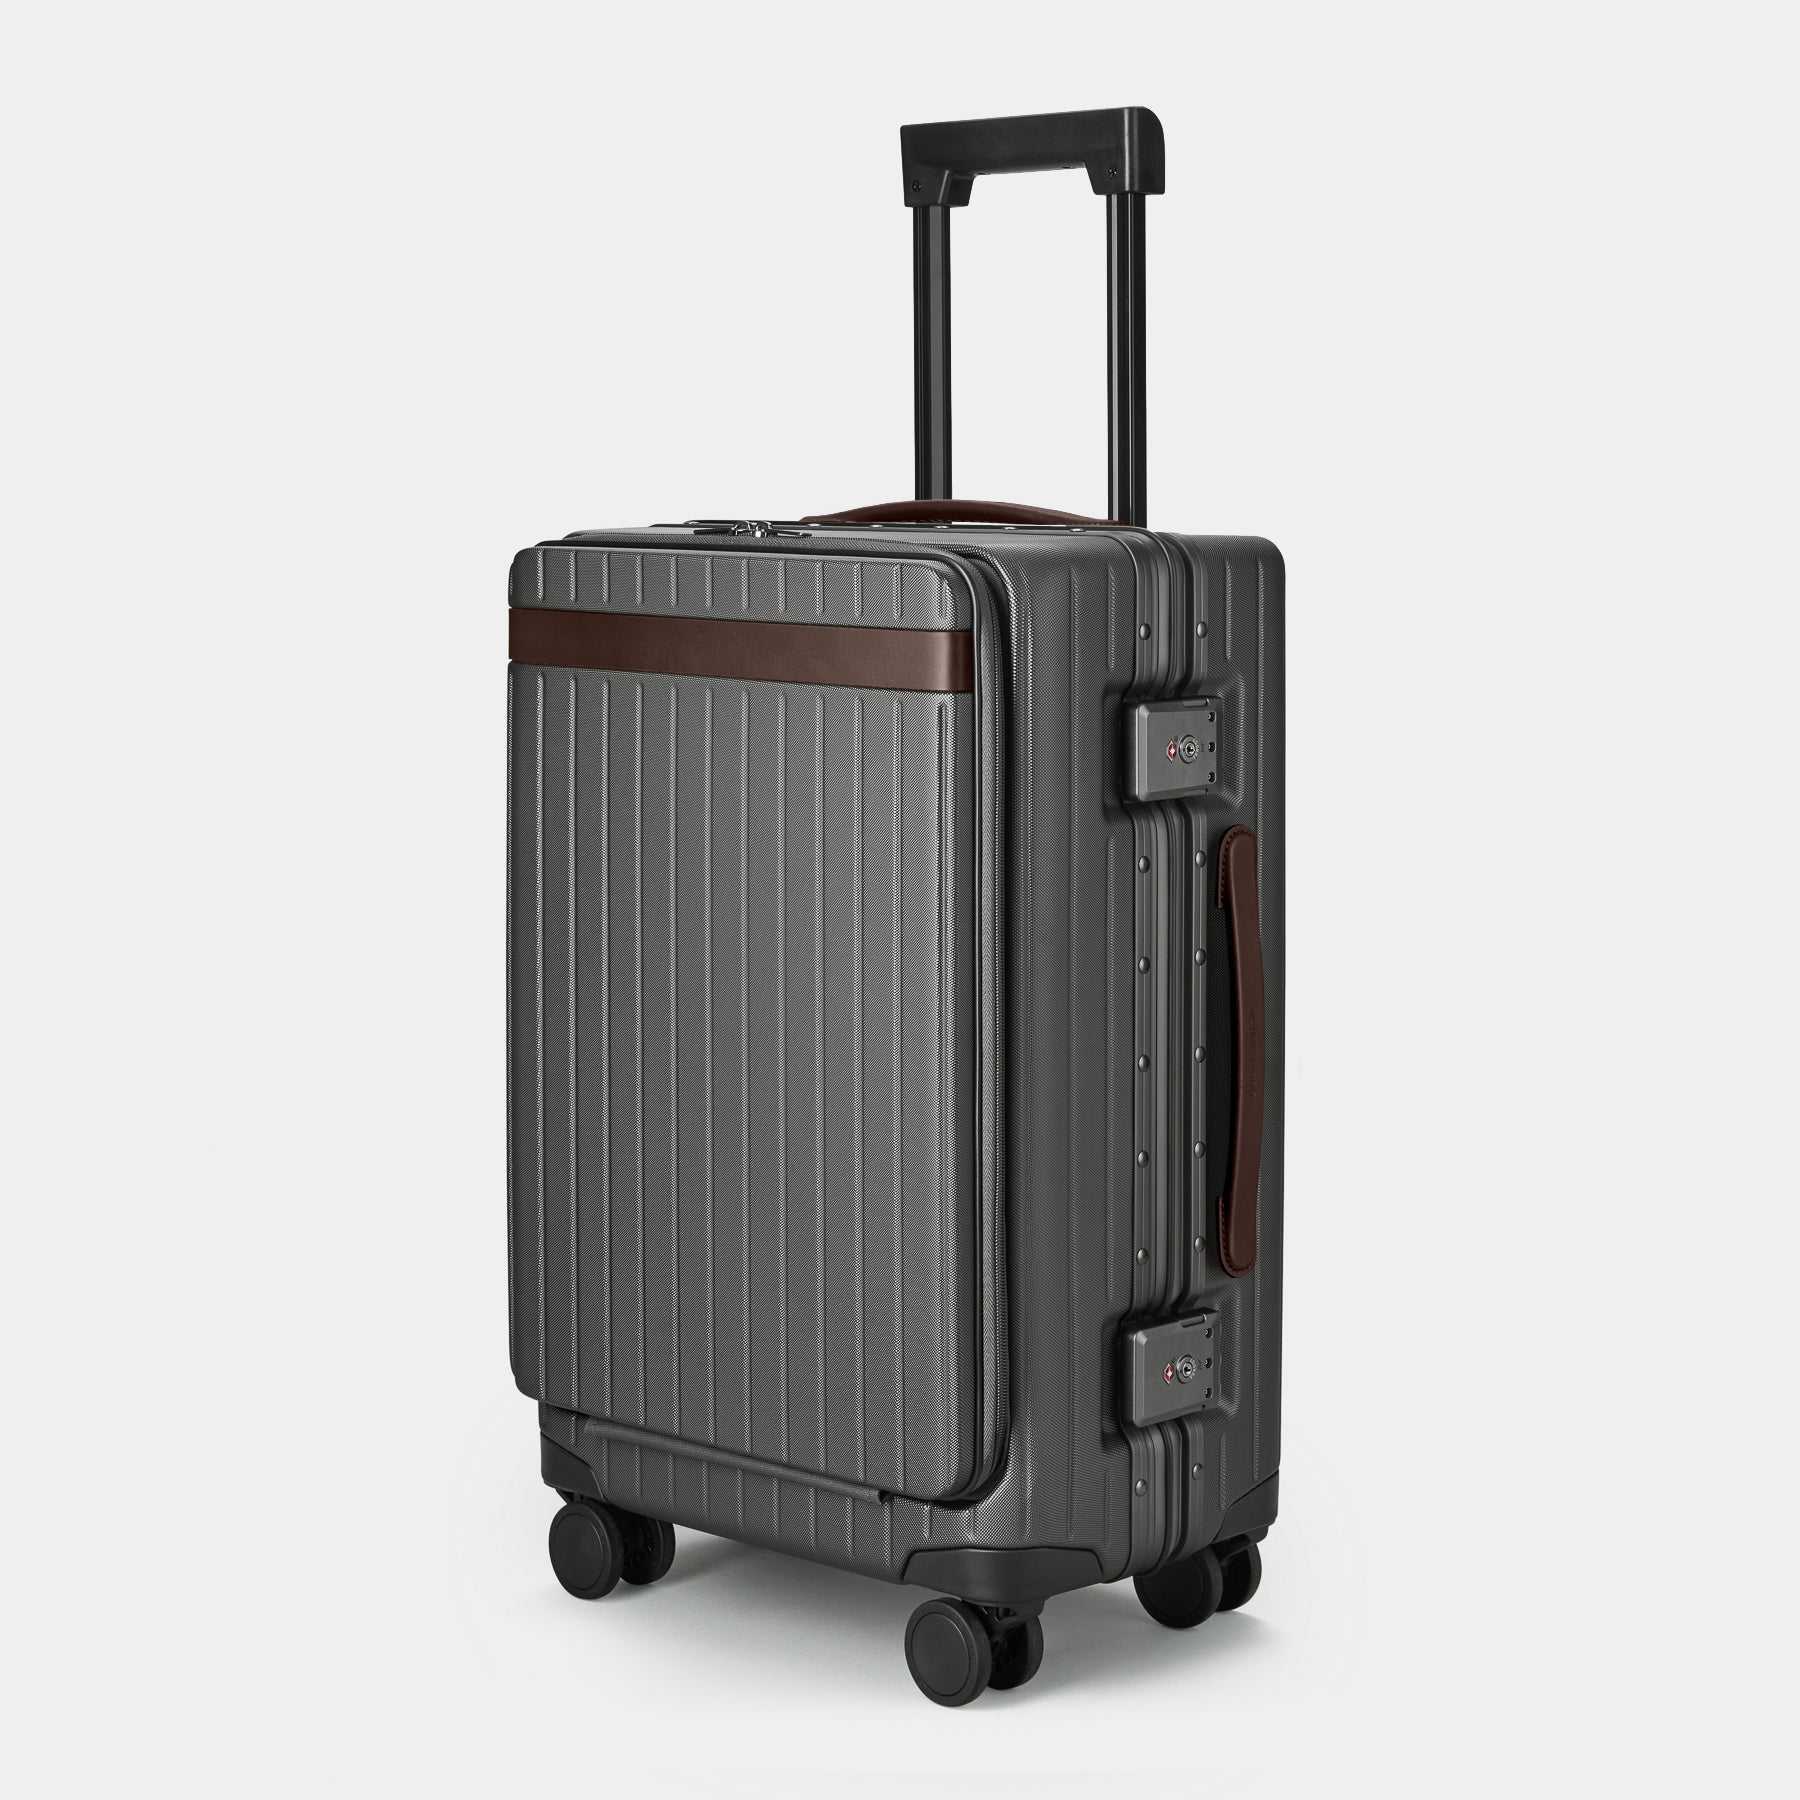 The Carry-on Pro - Return Chocolate Polycarbonate carry-on suitcase - Fair Condition